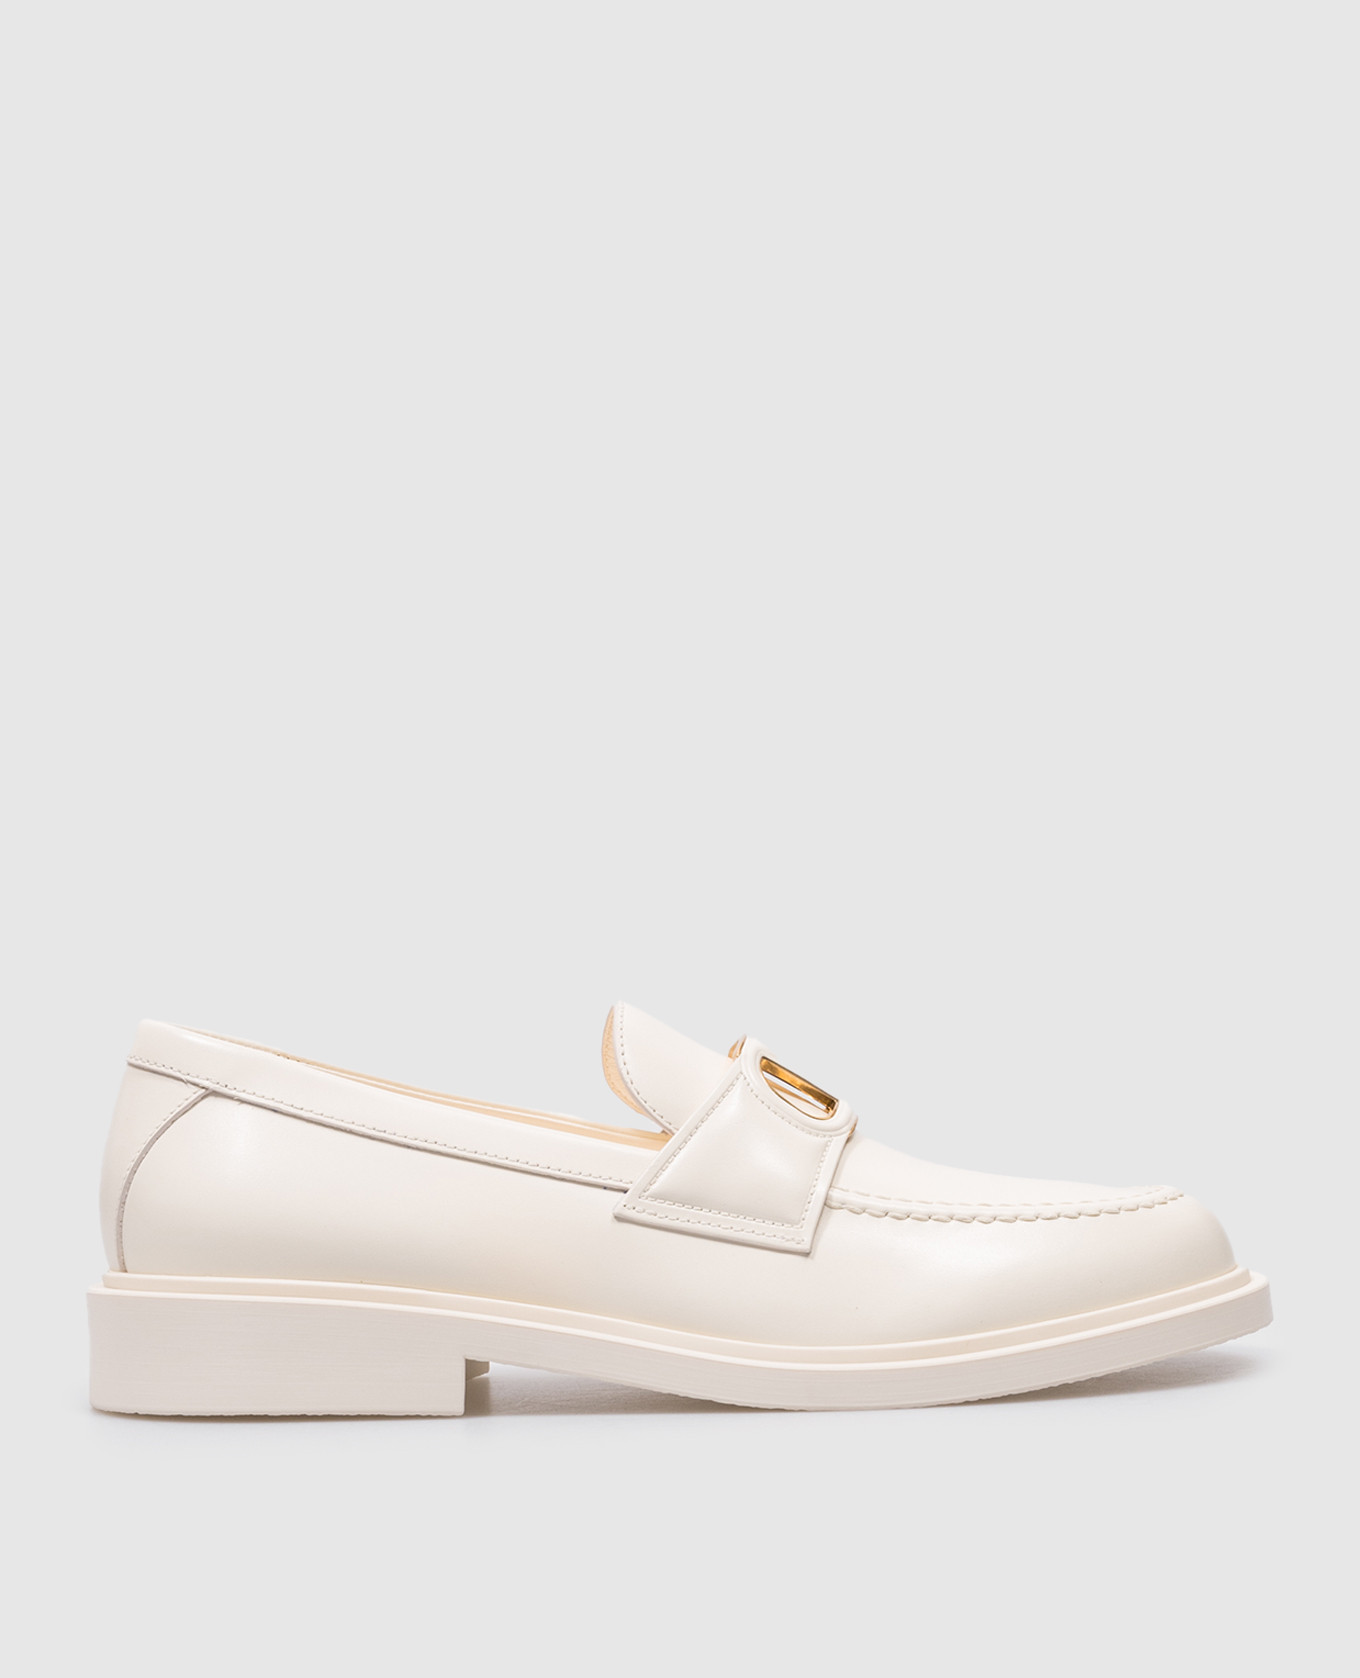 VLOGO SIGNATURE white leather loafers